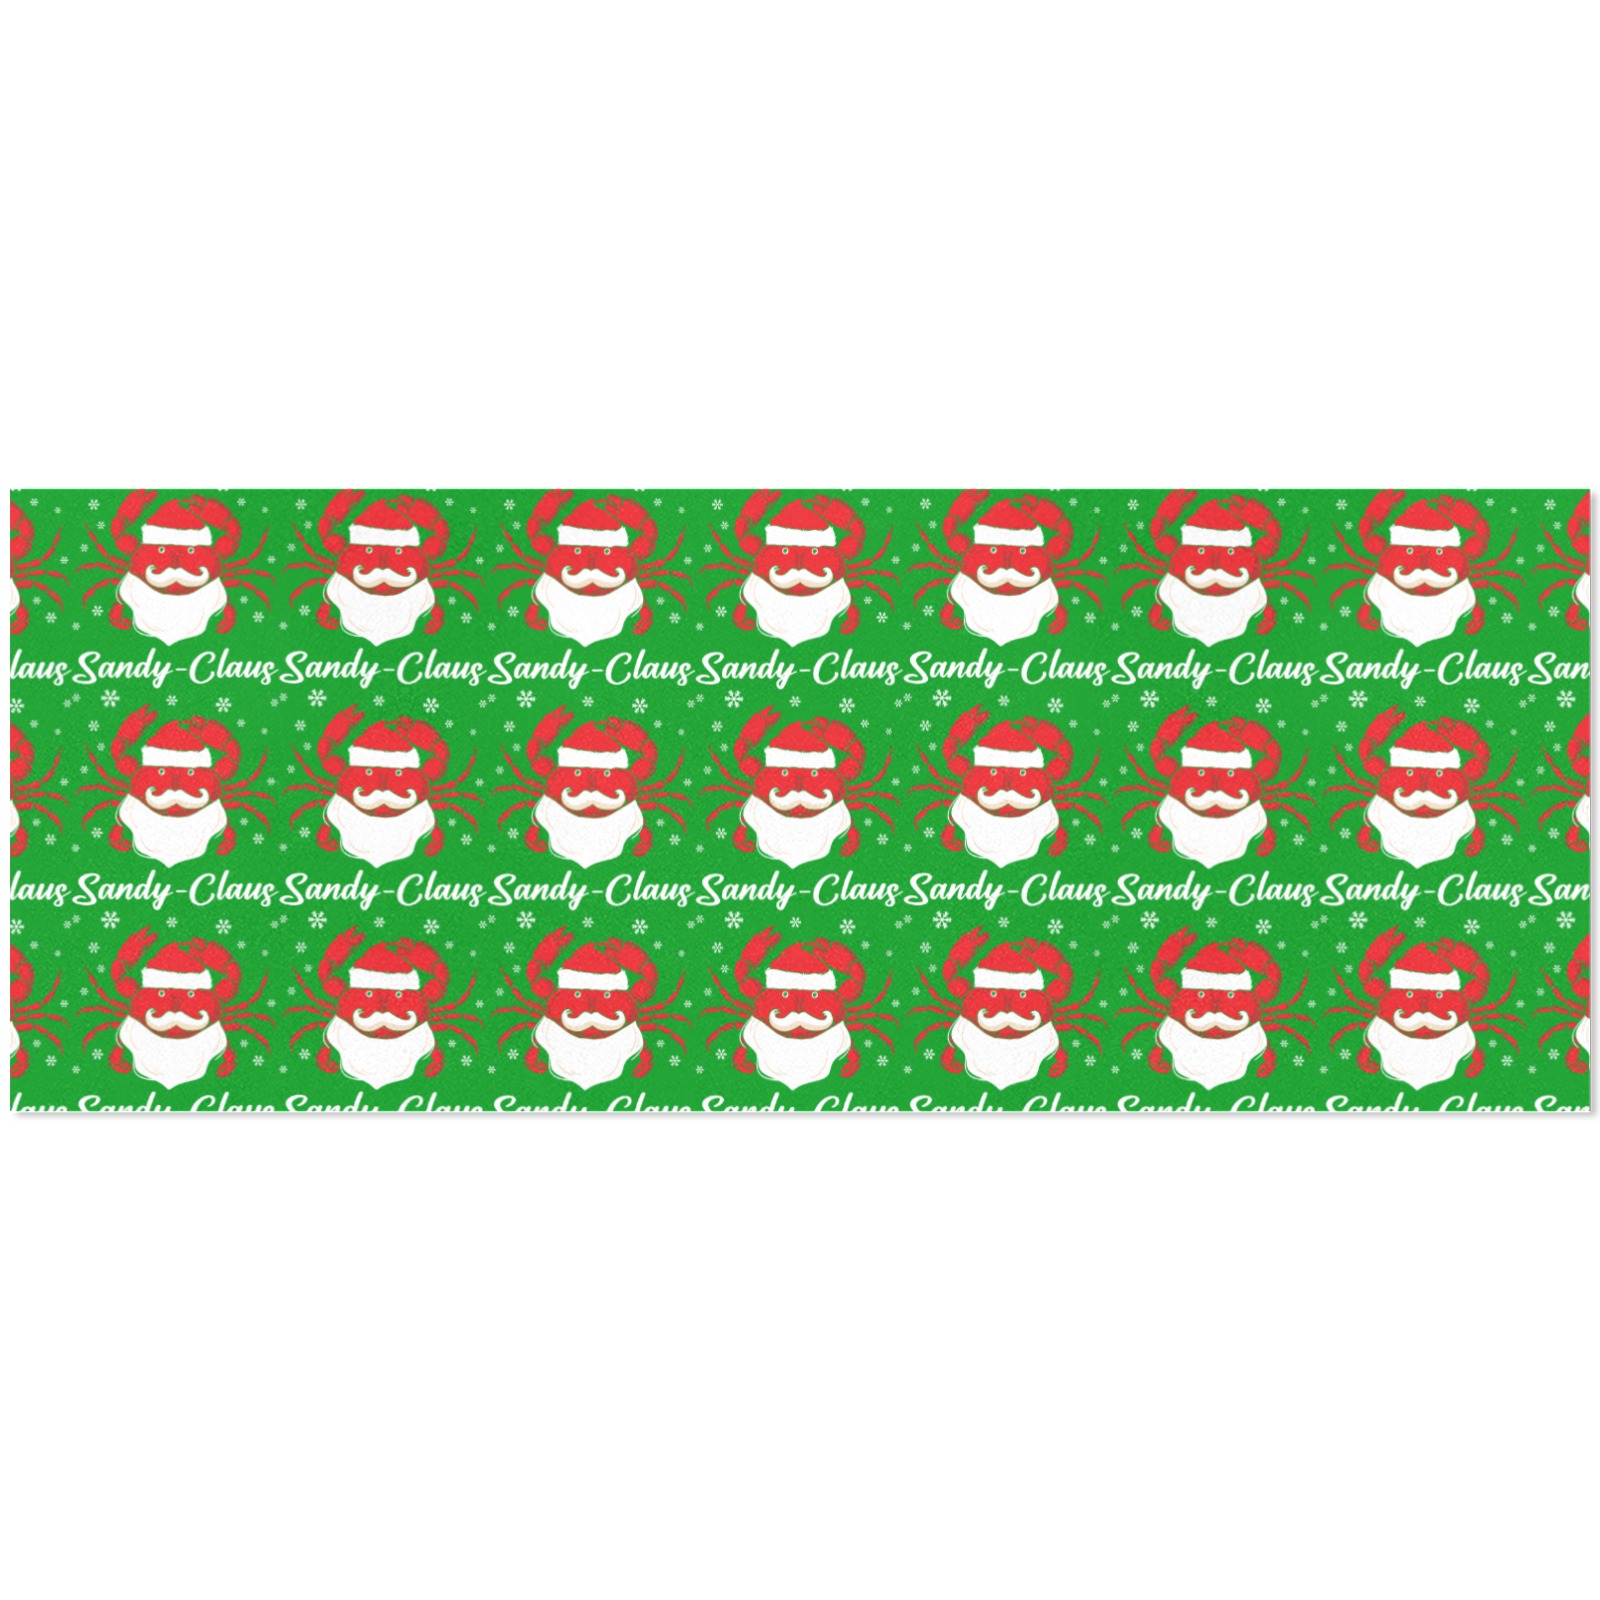 Sandy Claus Crab (G) Gift Wrapping Paper 58"x 23" (4 Rolls)